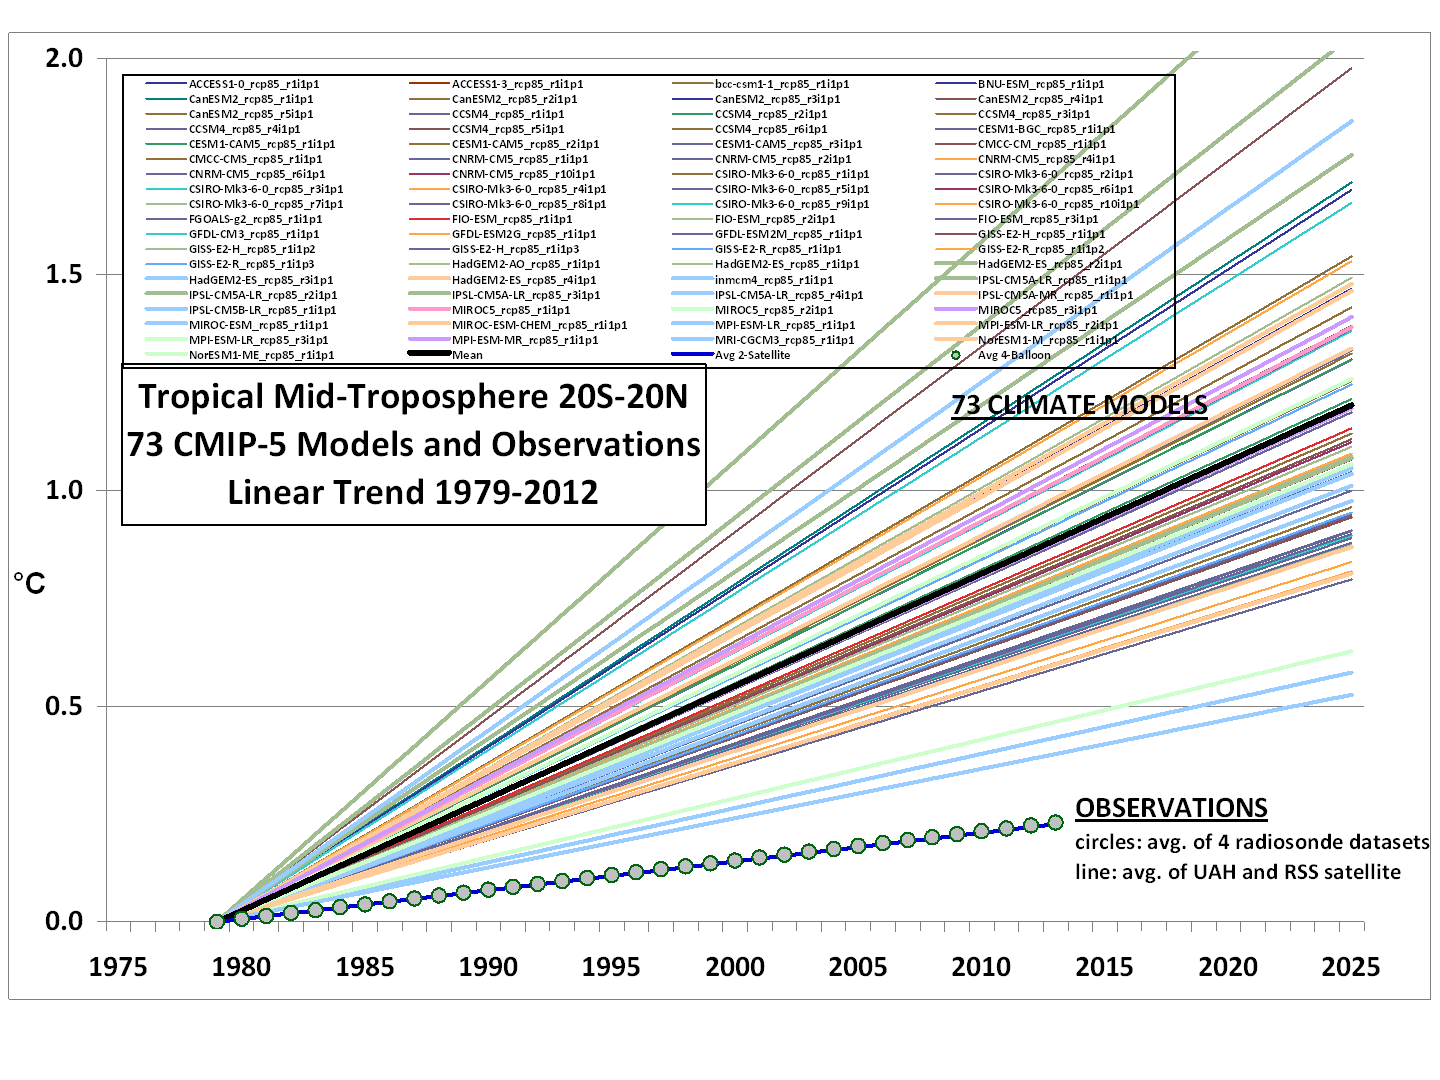 Climate Models vs. Observations for Tropical Tropospheric Temperature